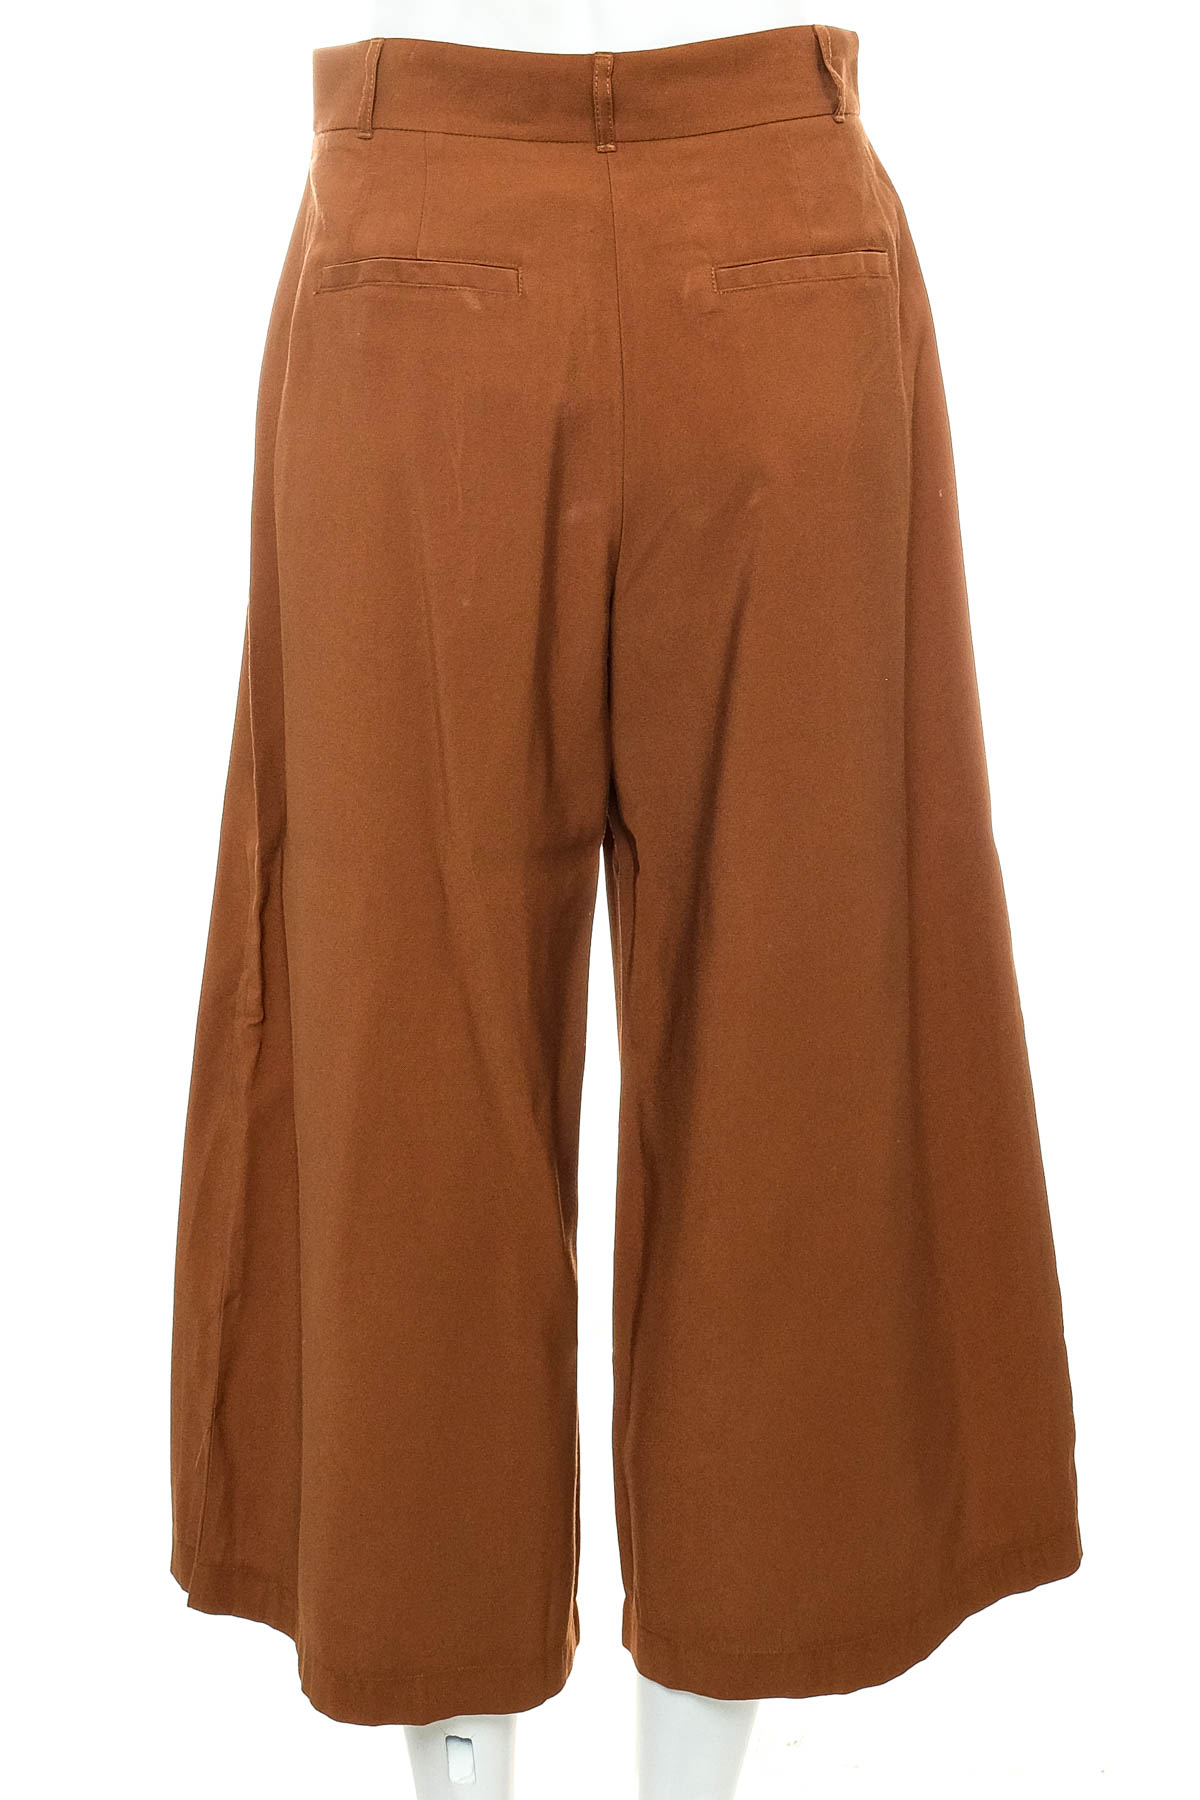 Women's trousers - S.Oliver BLACK LABEL - 1